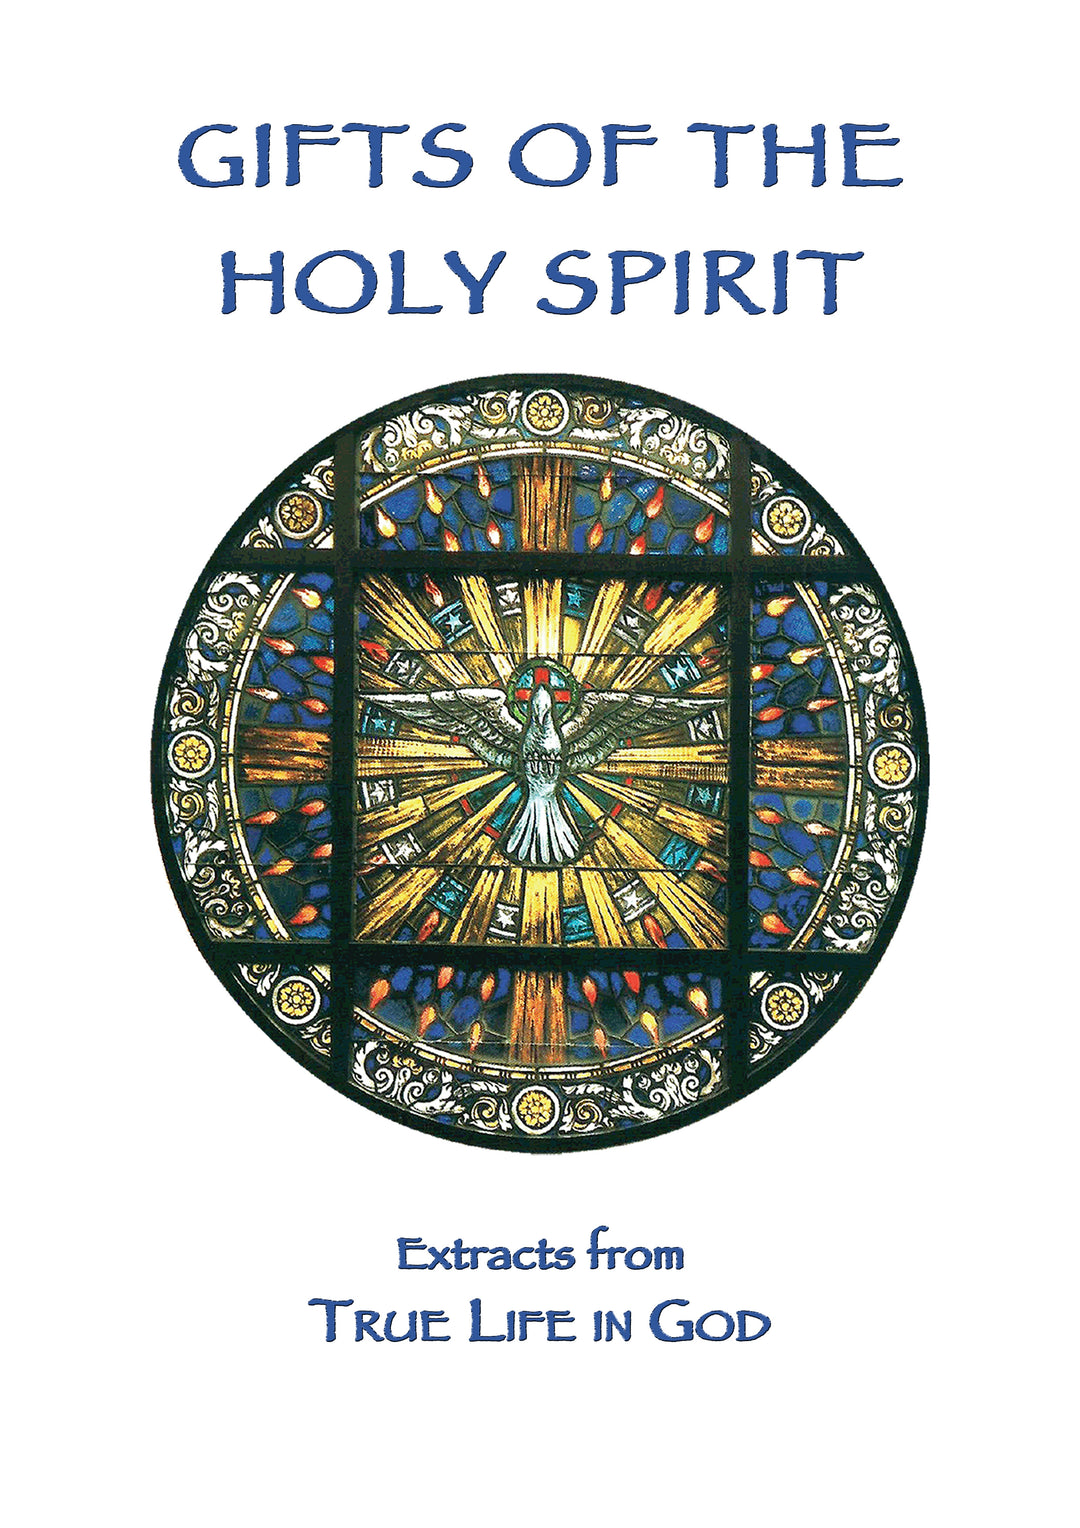 "Gifts of the Holy Spirit" Extracts From True Life in God Messages-booklet